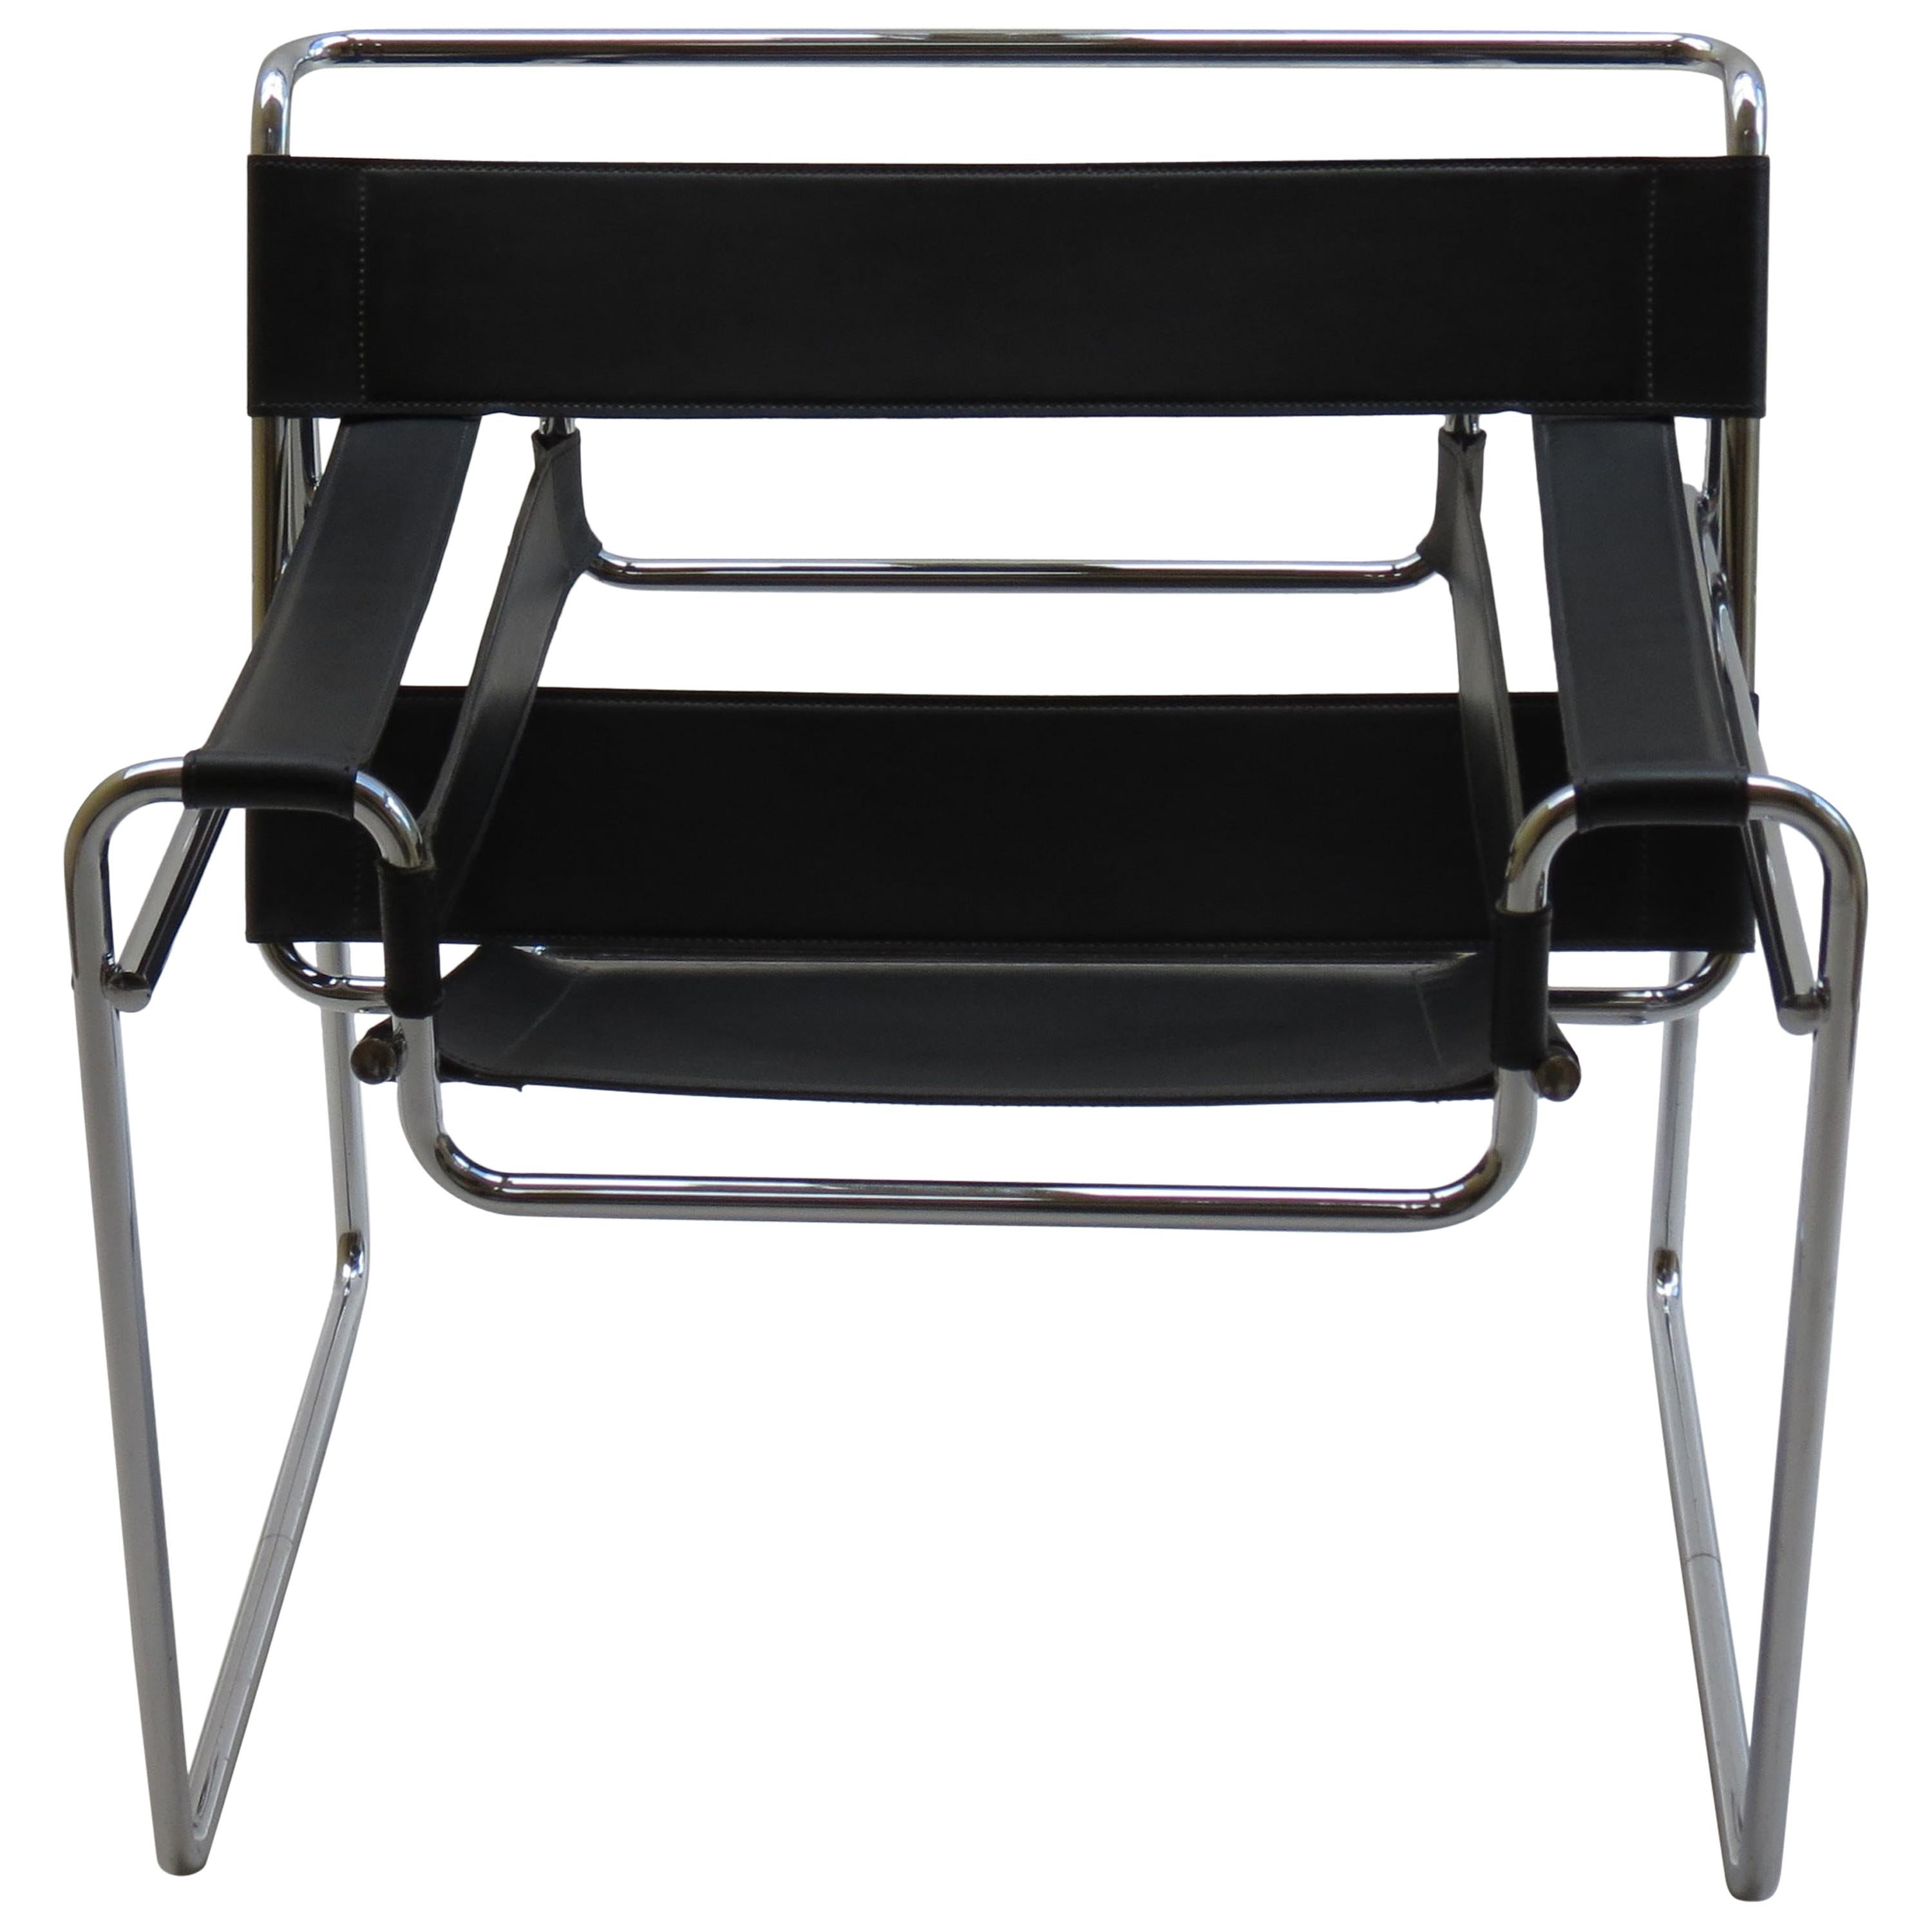 1980s Vintage Wassily B3 Black Leather and Chrome Chair Marcel Breuer